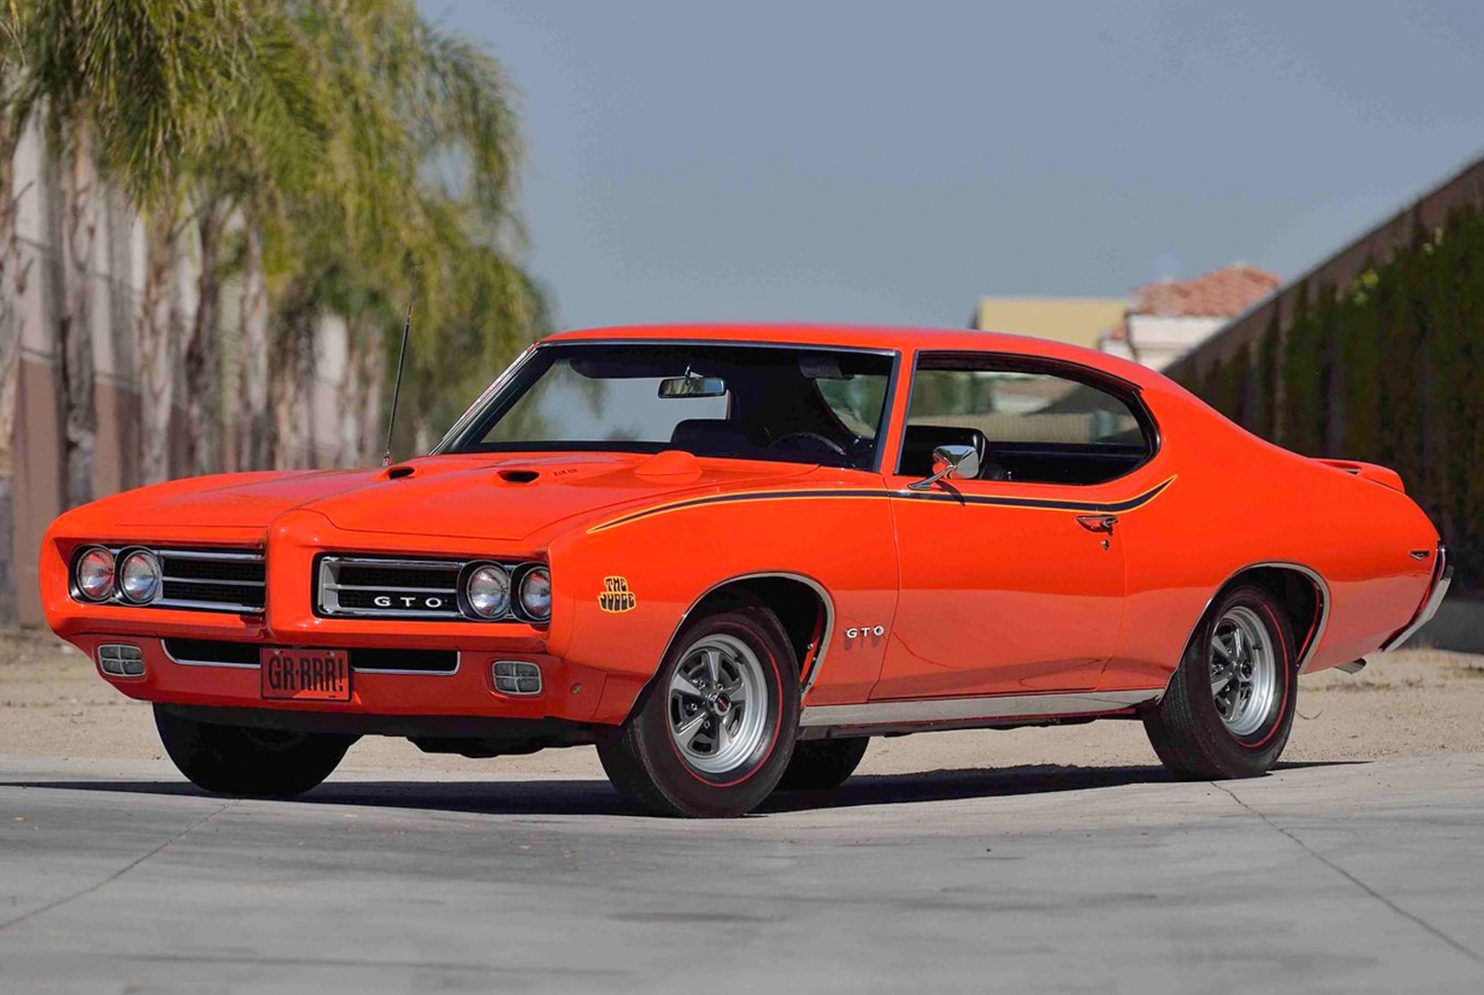 10 Badass Facts About Pontiac Gto The Judge